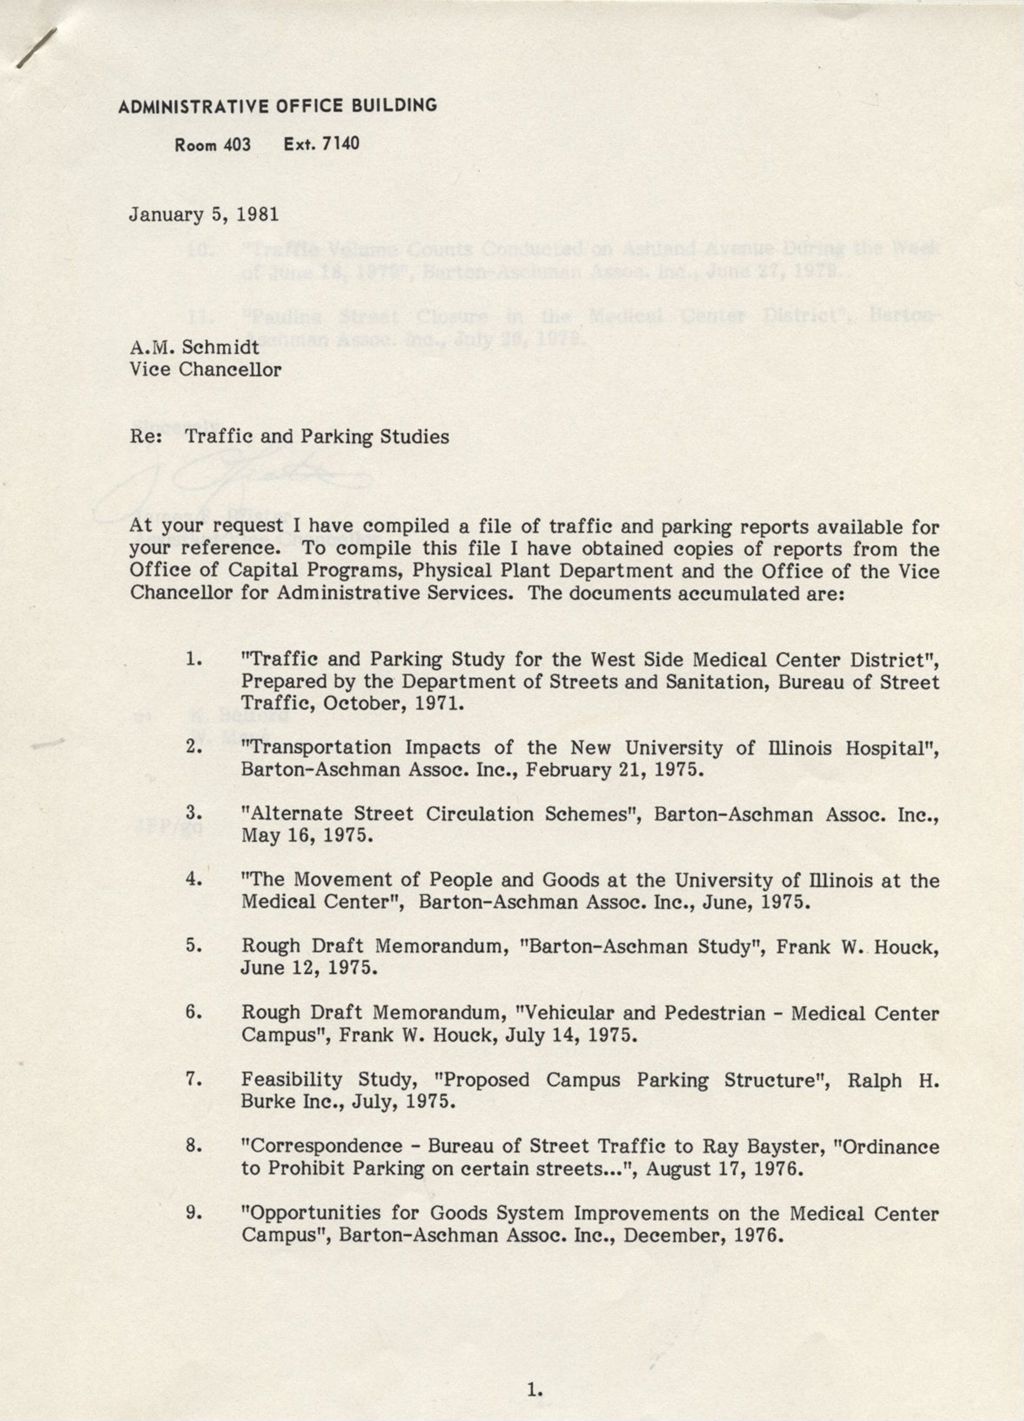 Miniature of List of Traffic and Parking Studies and Reports, University of Illinois at the Medical Center